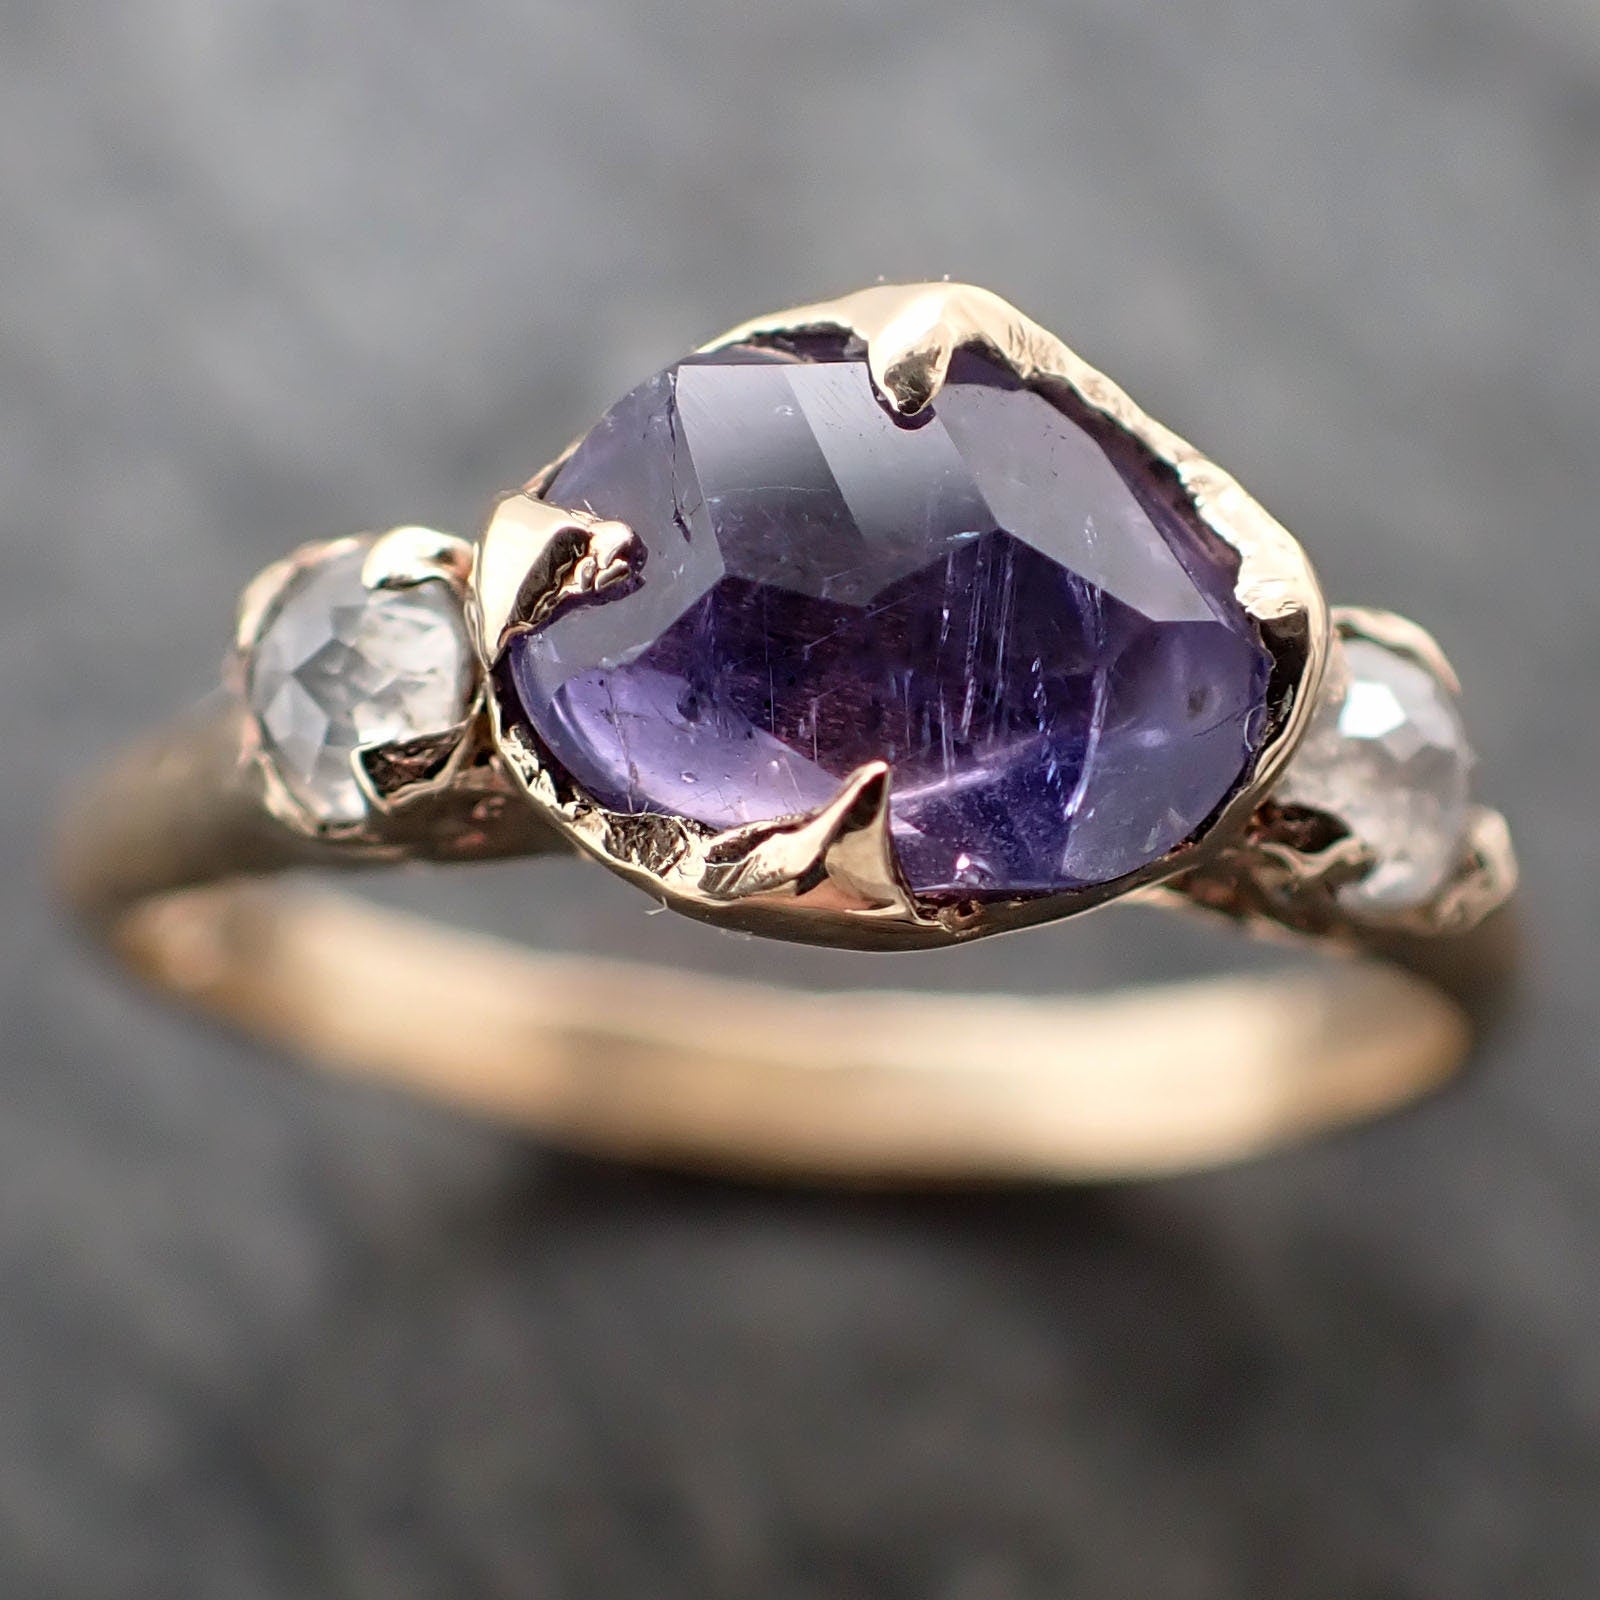 Buy Natural Amethyst Ring, Purple Amethyst Engagement Ring, February  Birthstone, Gemstone Ring, Anniversary Birthday Gift for Her, Yellow Gold  Online in India - Etsy